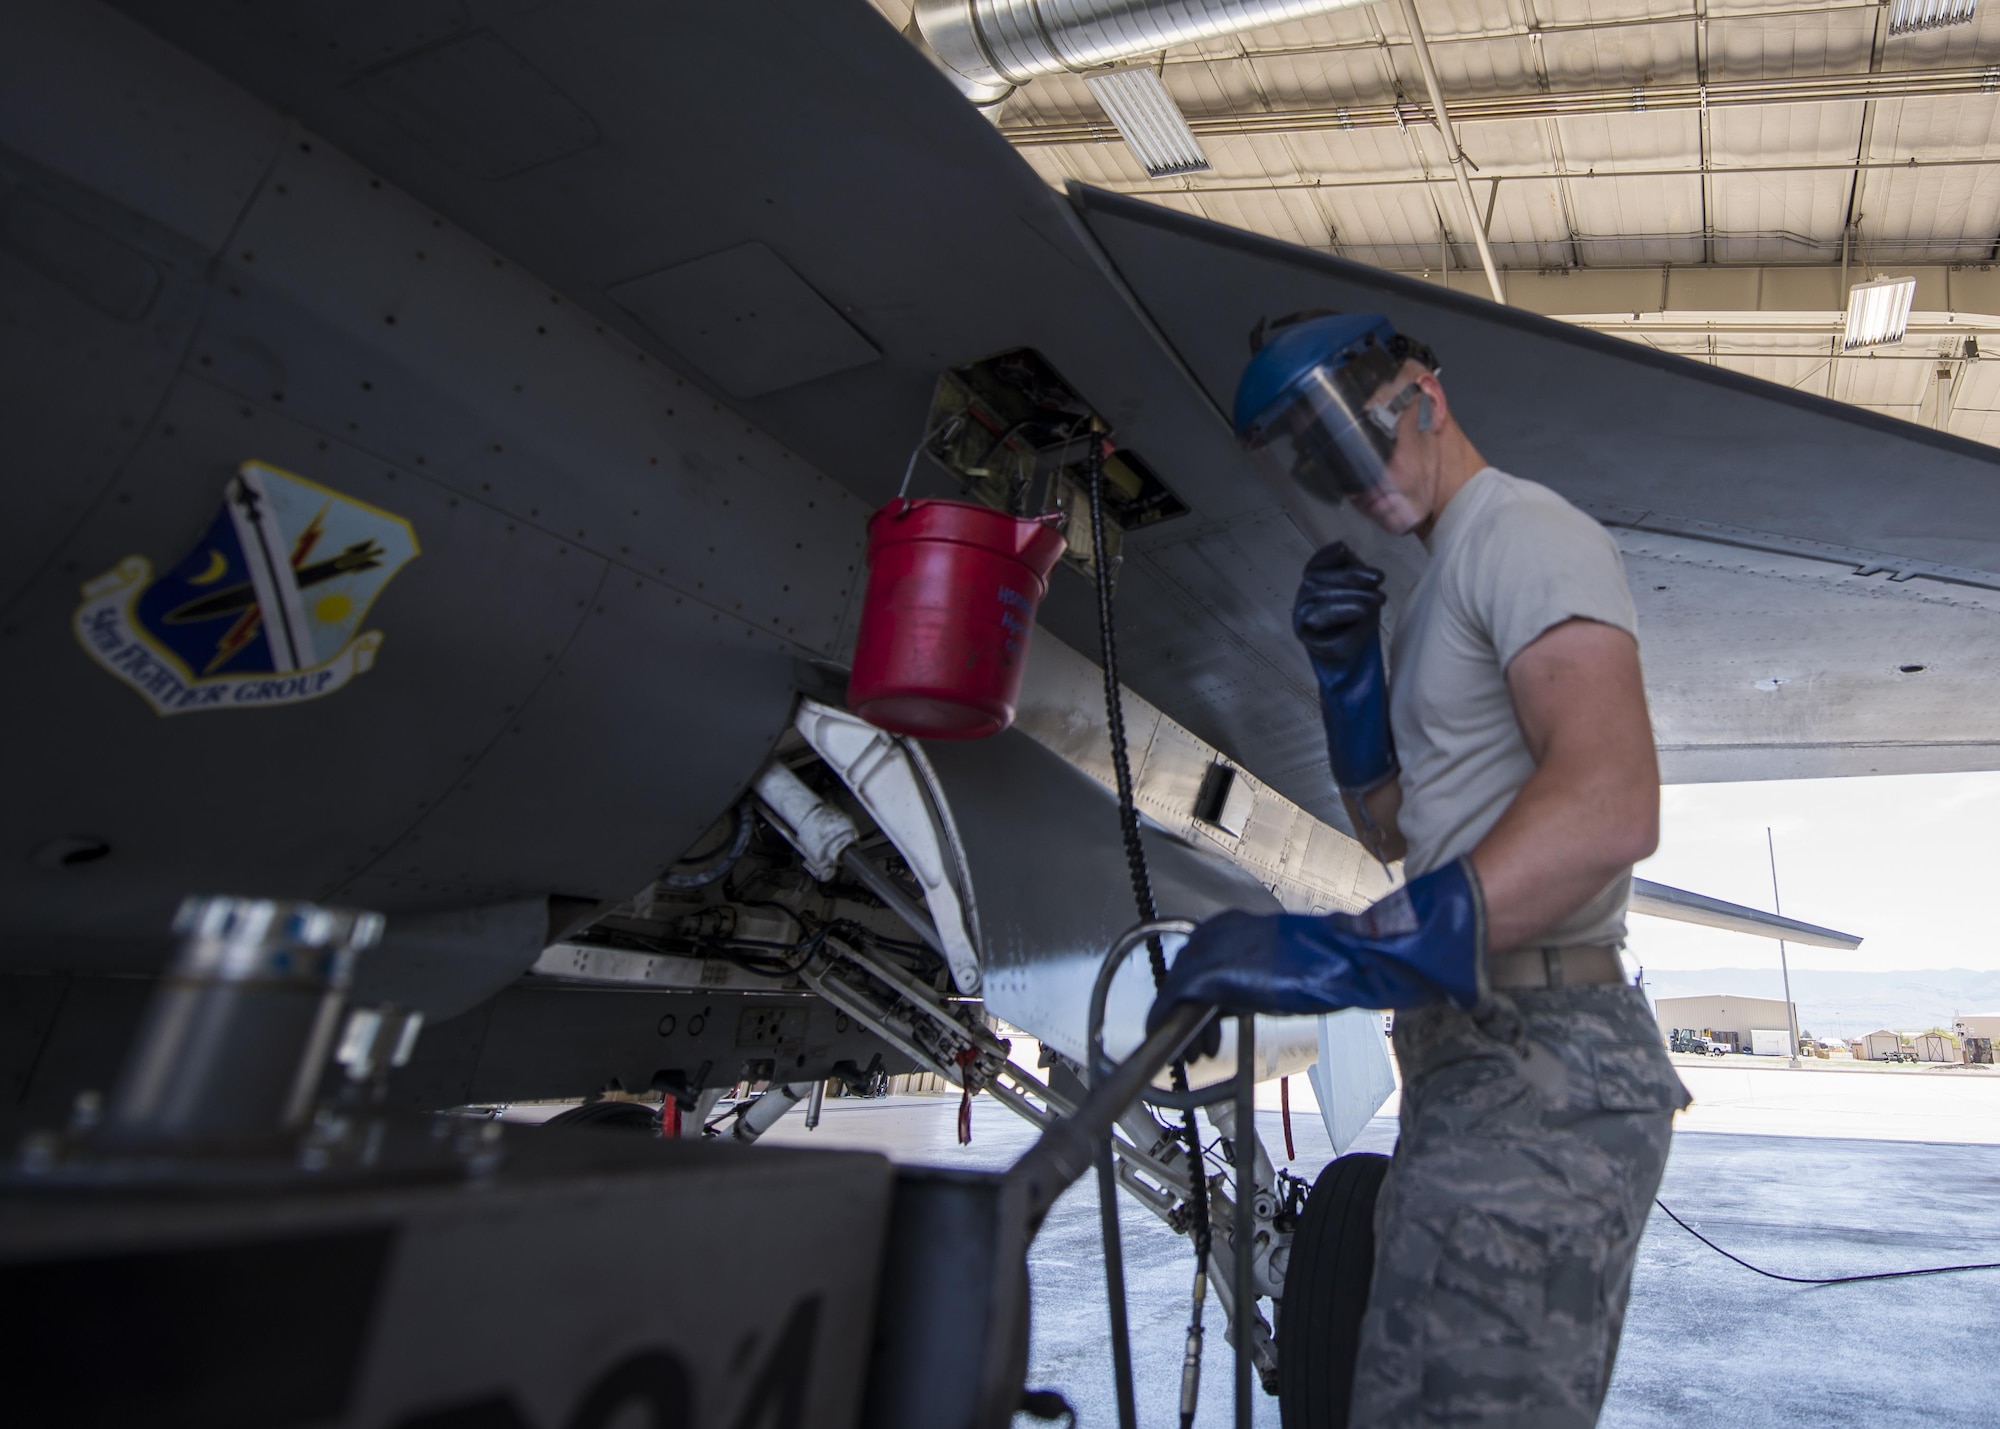 Airman 1st Class Derek King, a 54th Aircraft Maintenance Unit F-16 crew chief, performs recovery operations on an F-16 Fighting Falcon at Holloman Air Force Base, N.M. on May 4, 2017. Crew chiefs perform a variety of maintenance tasks from oil servicing and tire checks to readying a jet for flight. (U.S. Air Force photo by Airman 1st Class Alexis P. Docherty) 